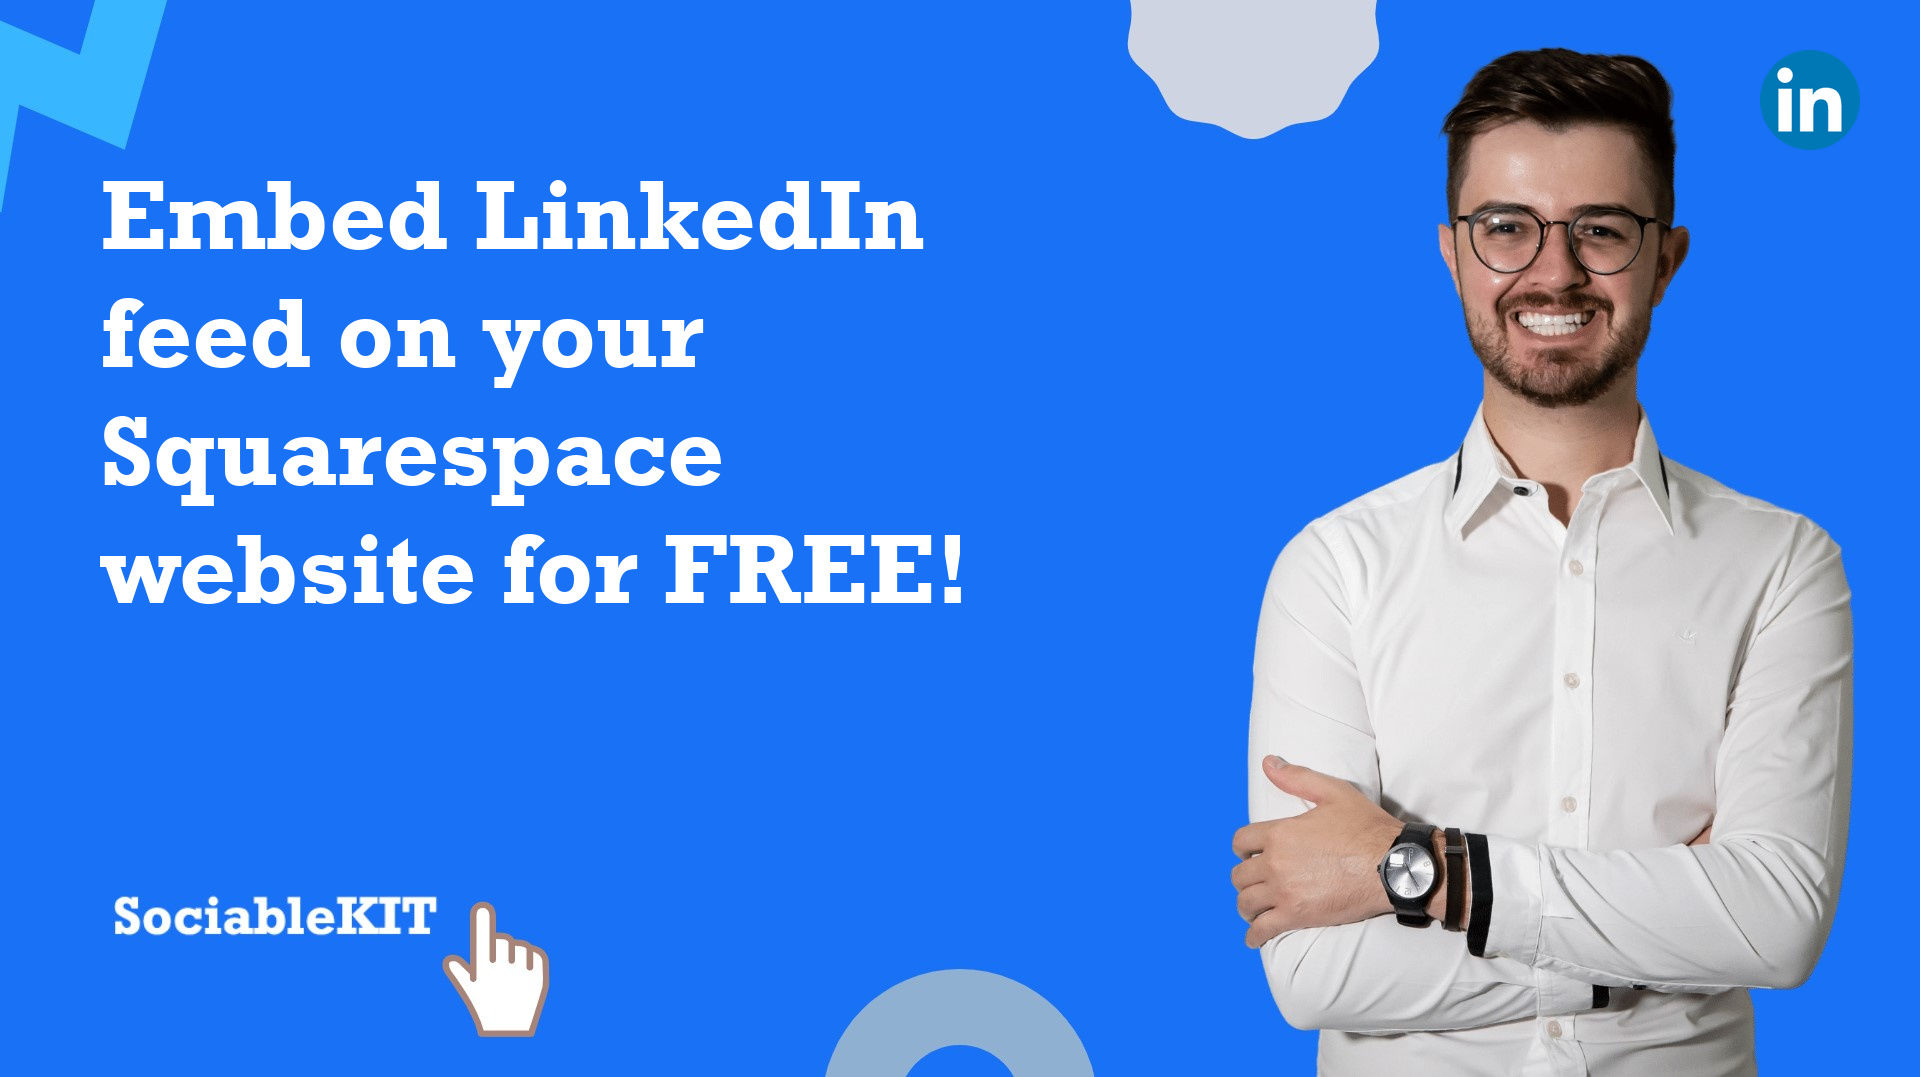 How to embed LinkedIn feed on your Squarespace website for FREE?